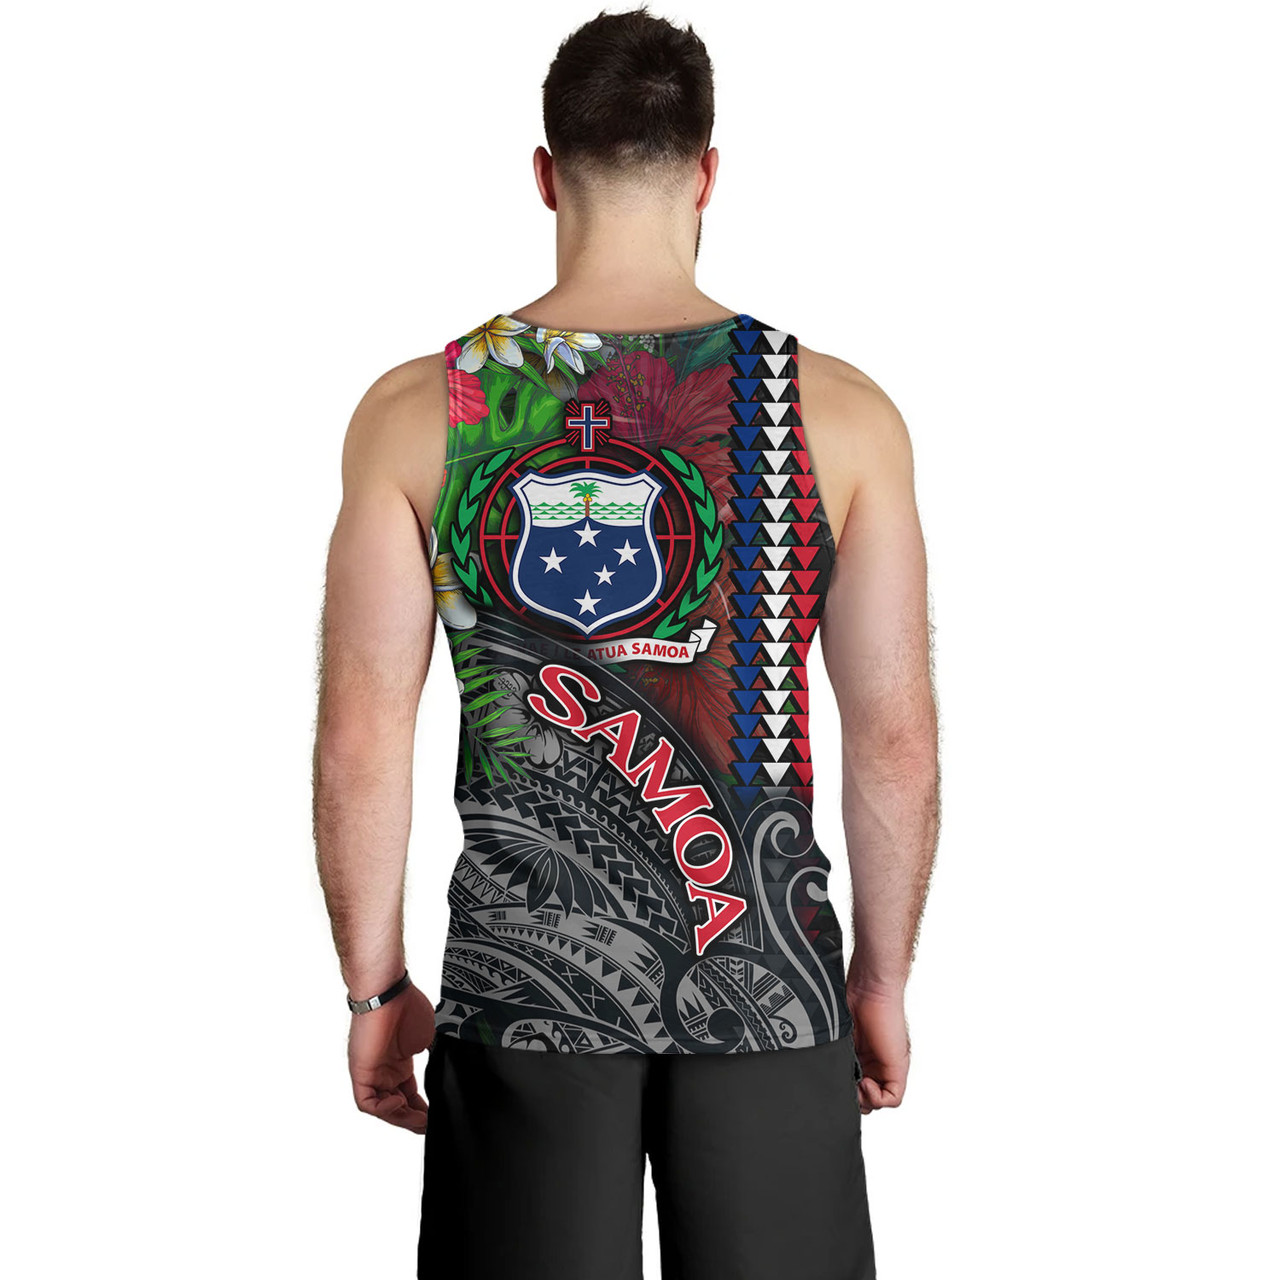 Samoa Custom Personalised Tank Top Samoa Seal Hibiscus And Plumeria With Palm Branches Vintage Style